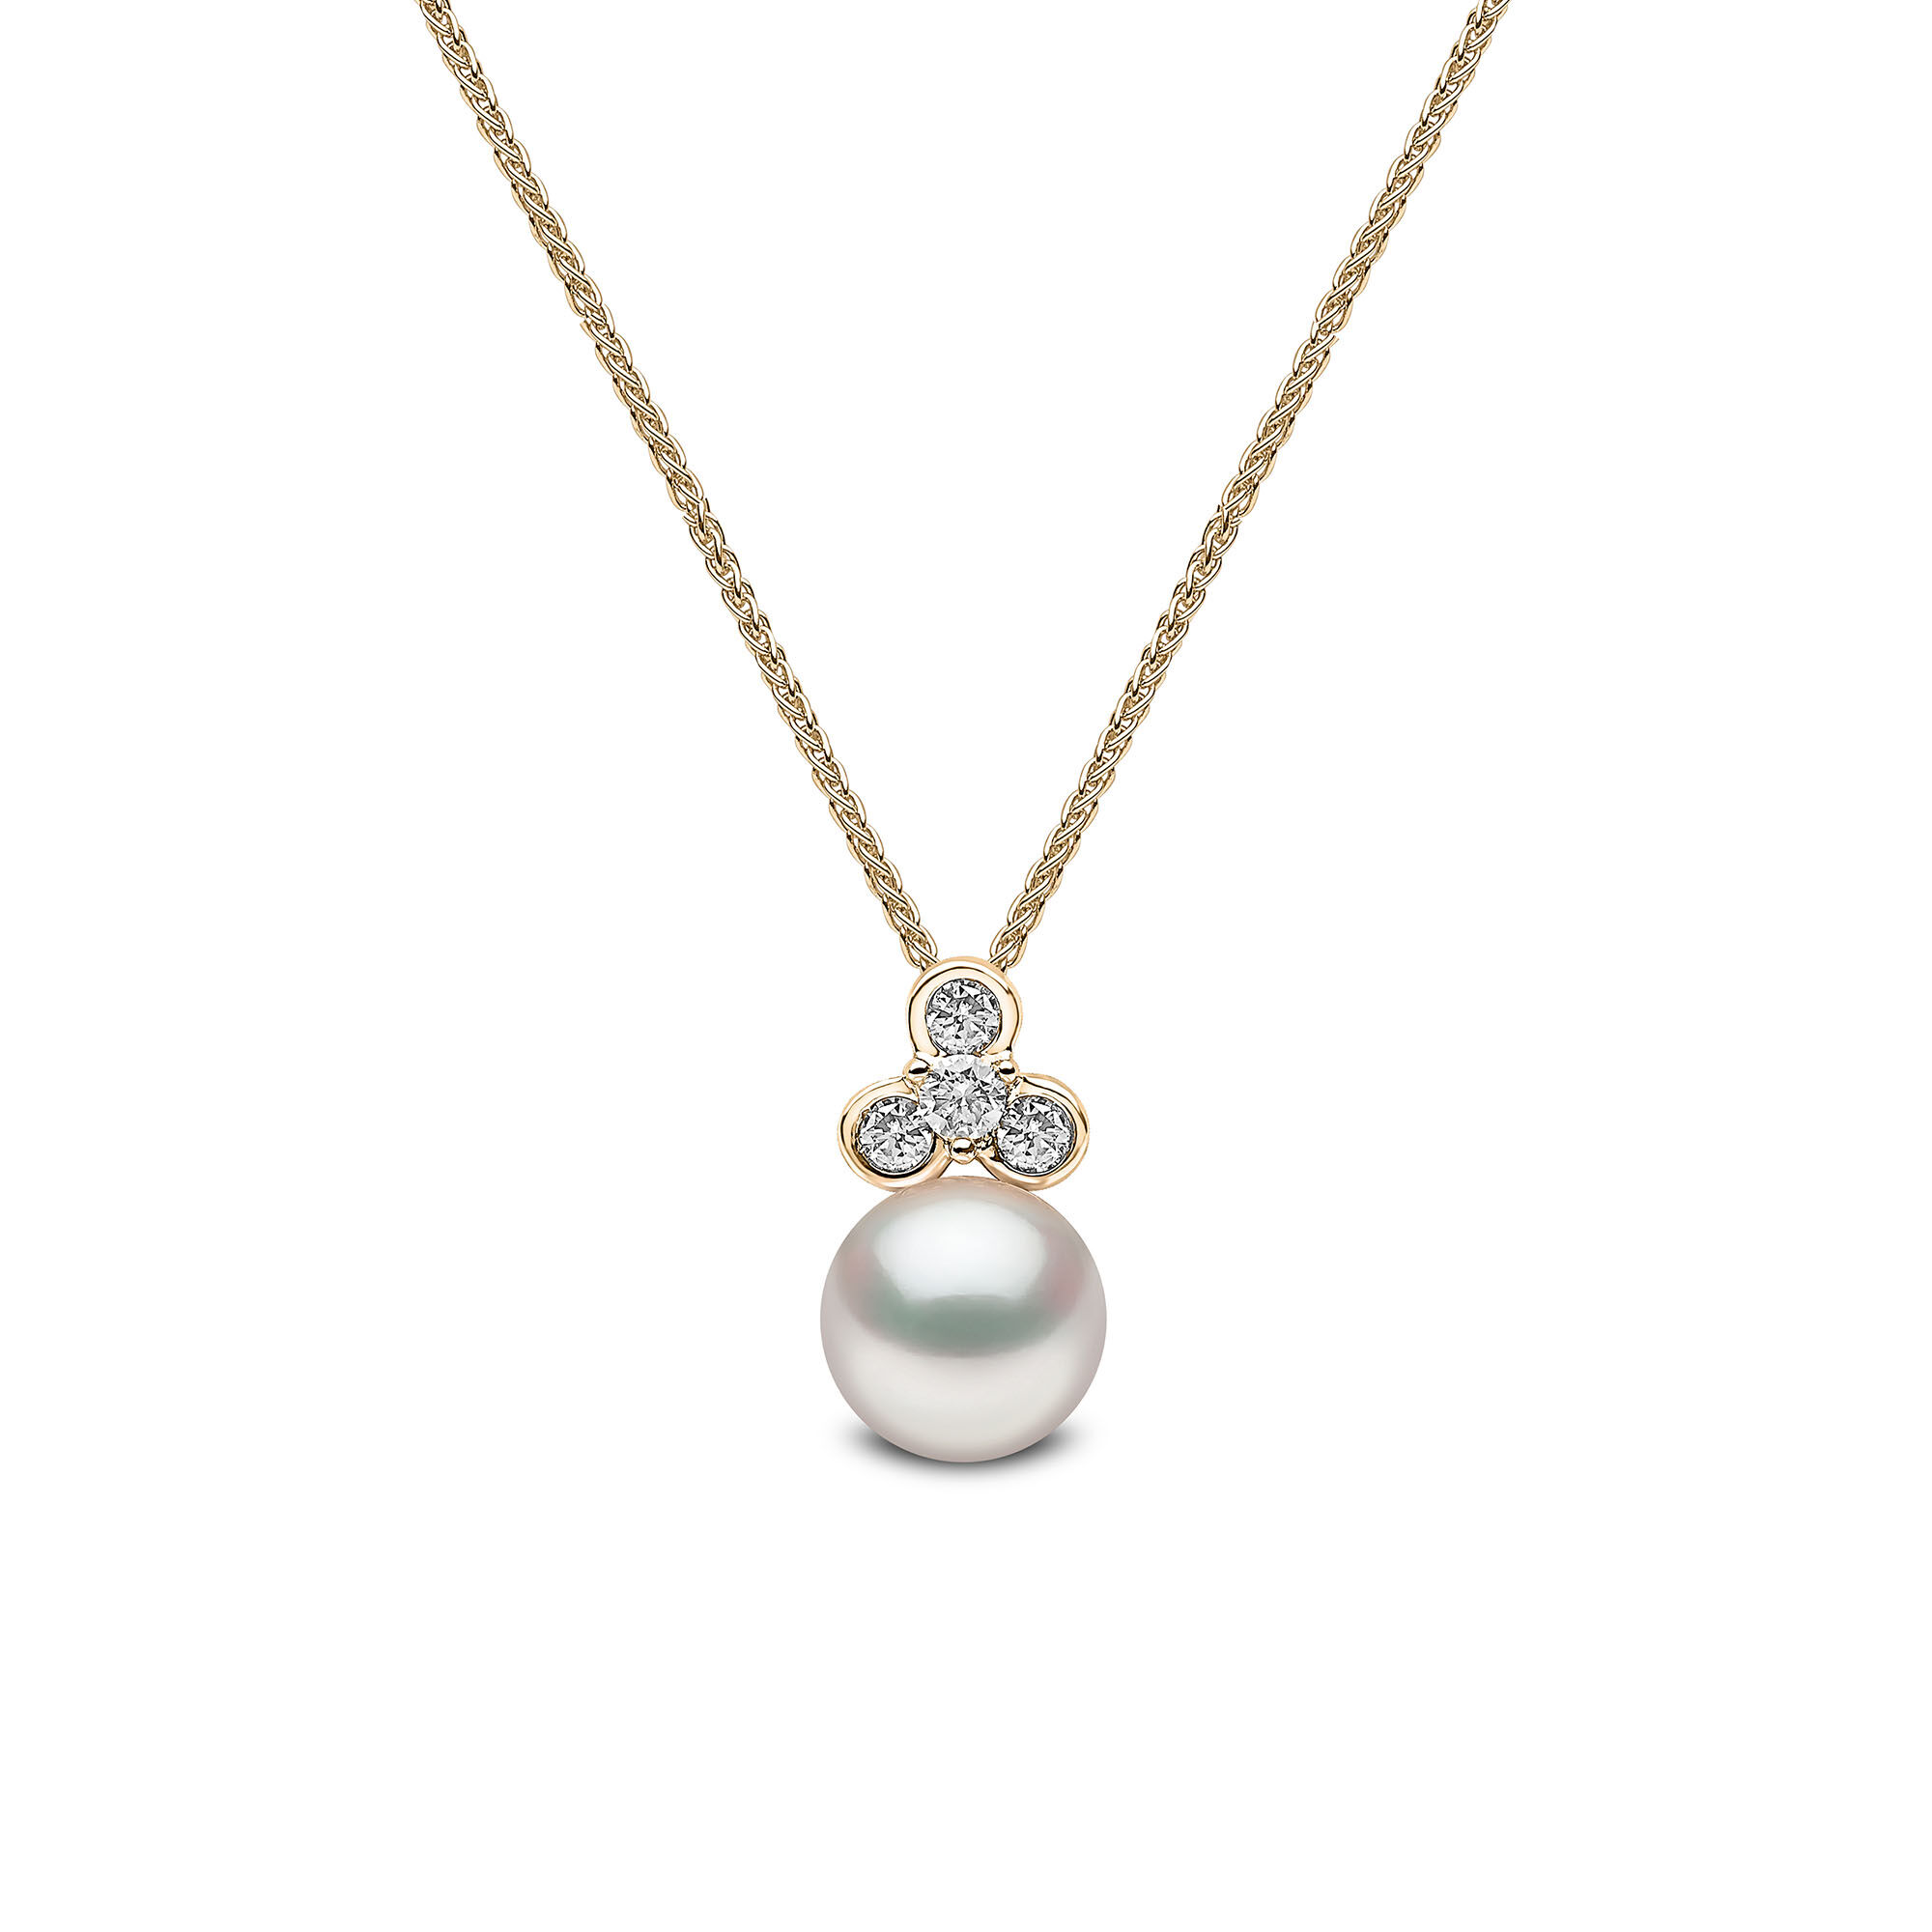 Trend Yellow Gold Pearl and Diamond Necklace | Yoko London 